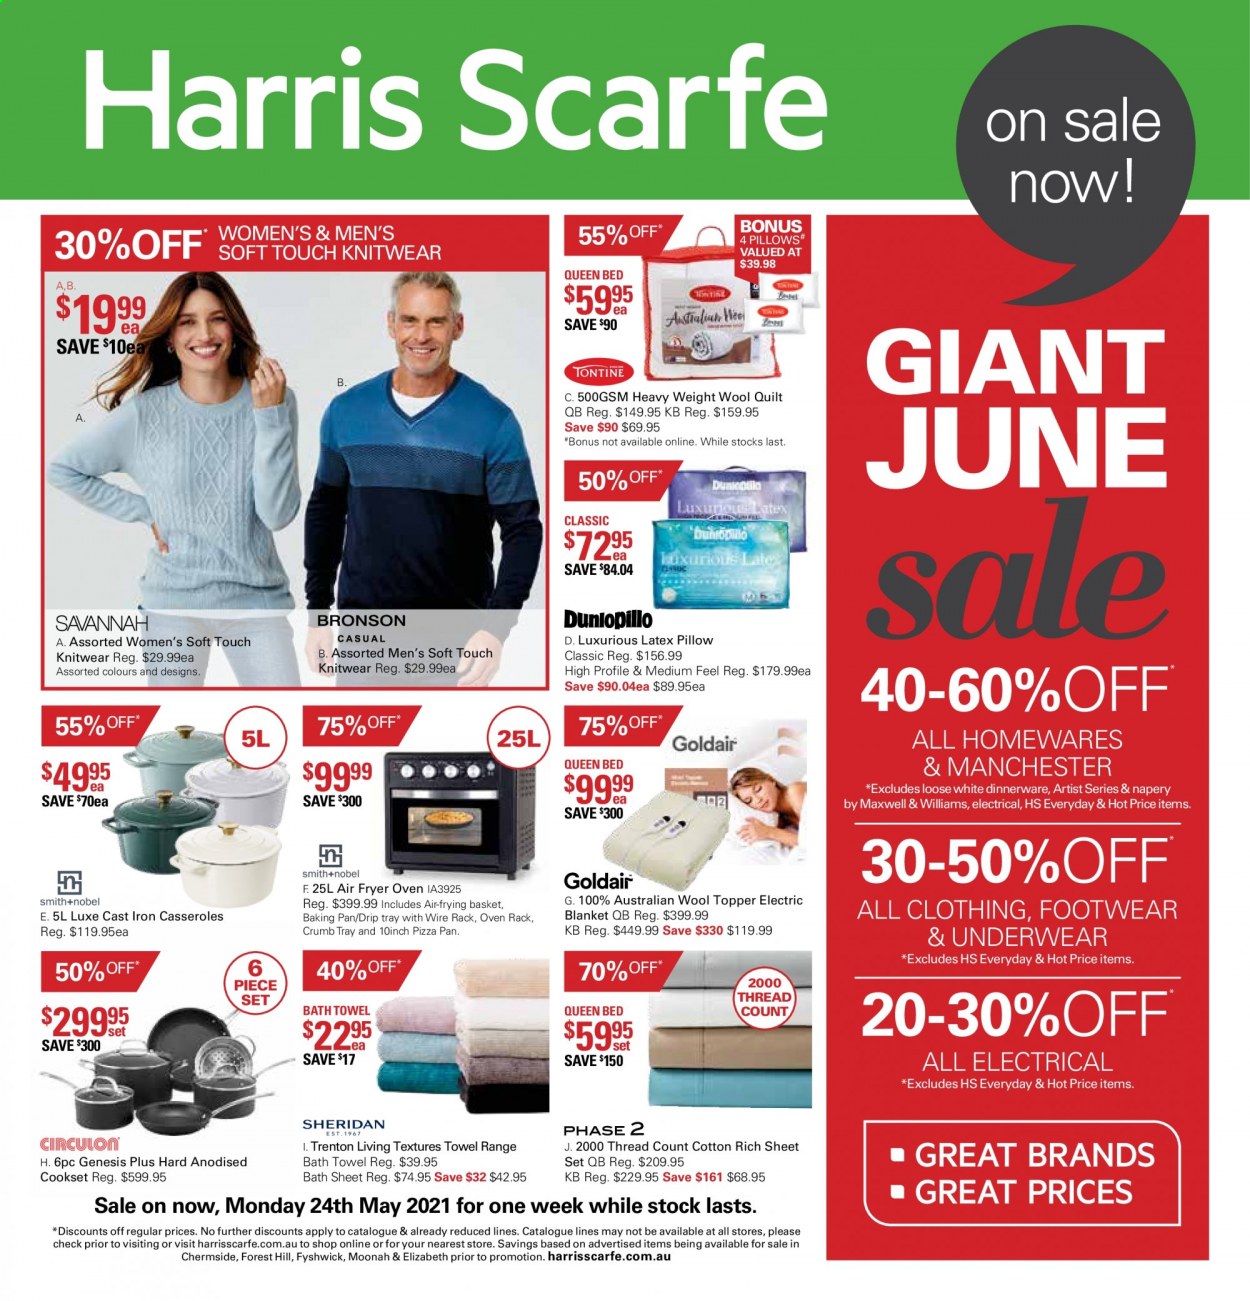 thumbnail - Harris Scarfe Catalogue - Sales products - basket, topper, dinnerware set, pan, pizza pan, blanket, pillow, quilt, wool quilt, bath towel, towel, oven, electric blanket, knitwear, underwear. Page 1.